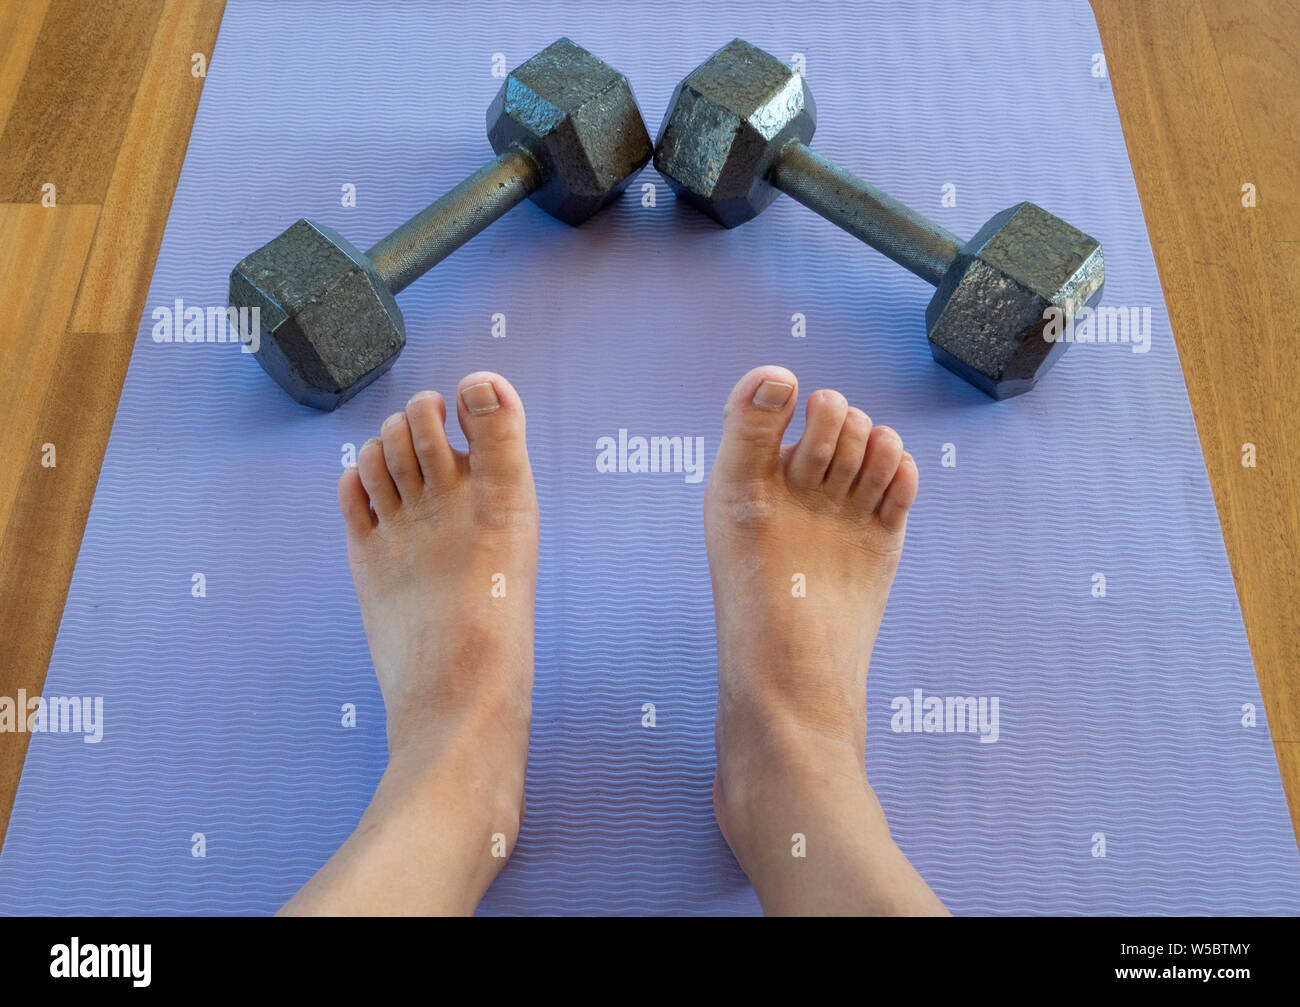 Feet and Dumbbells after a home workout on a yoga mat Stock Photo